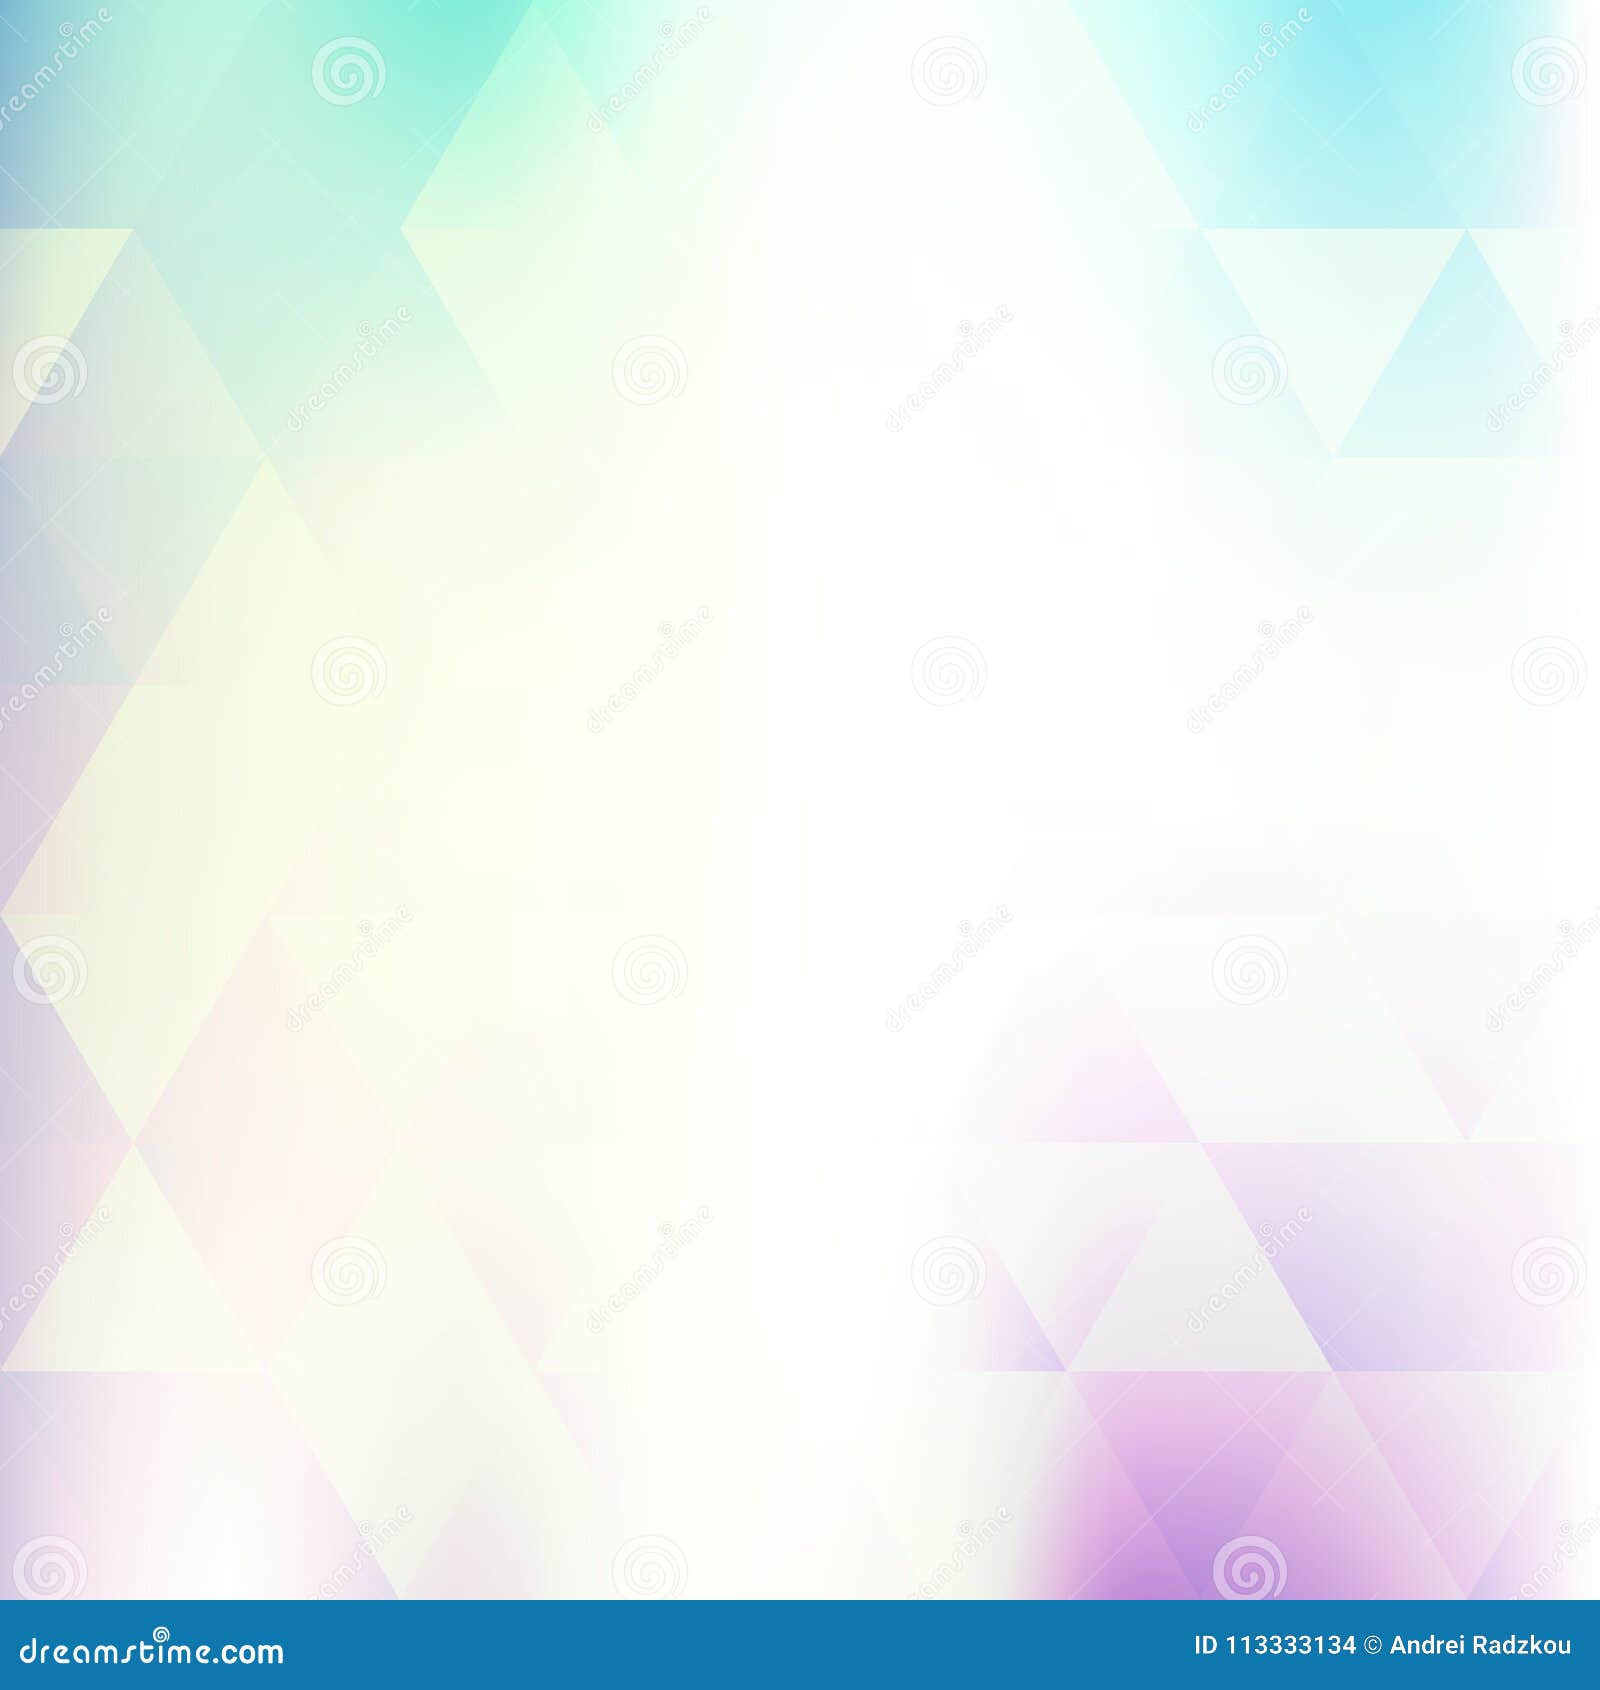 Simple Light Background with Transparent Triangles. Vector Stock Vector -  Illustration of triangles, purple: 113333134